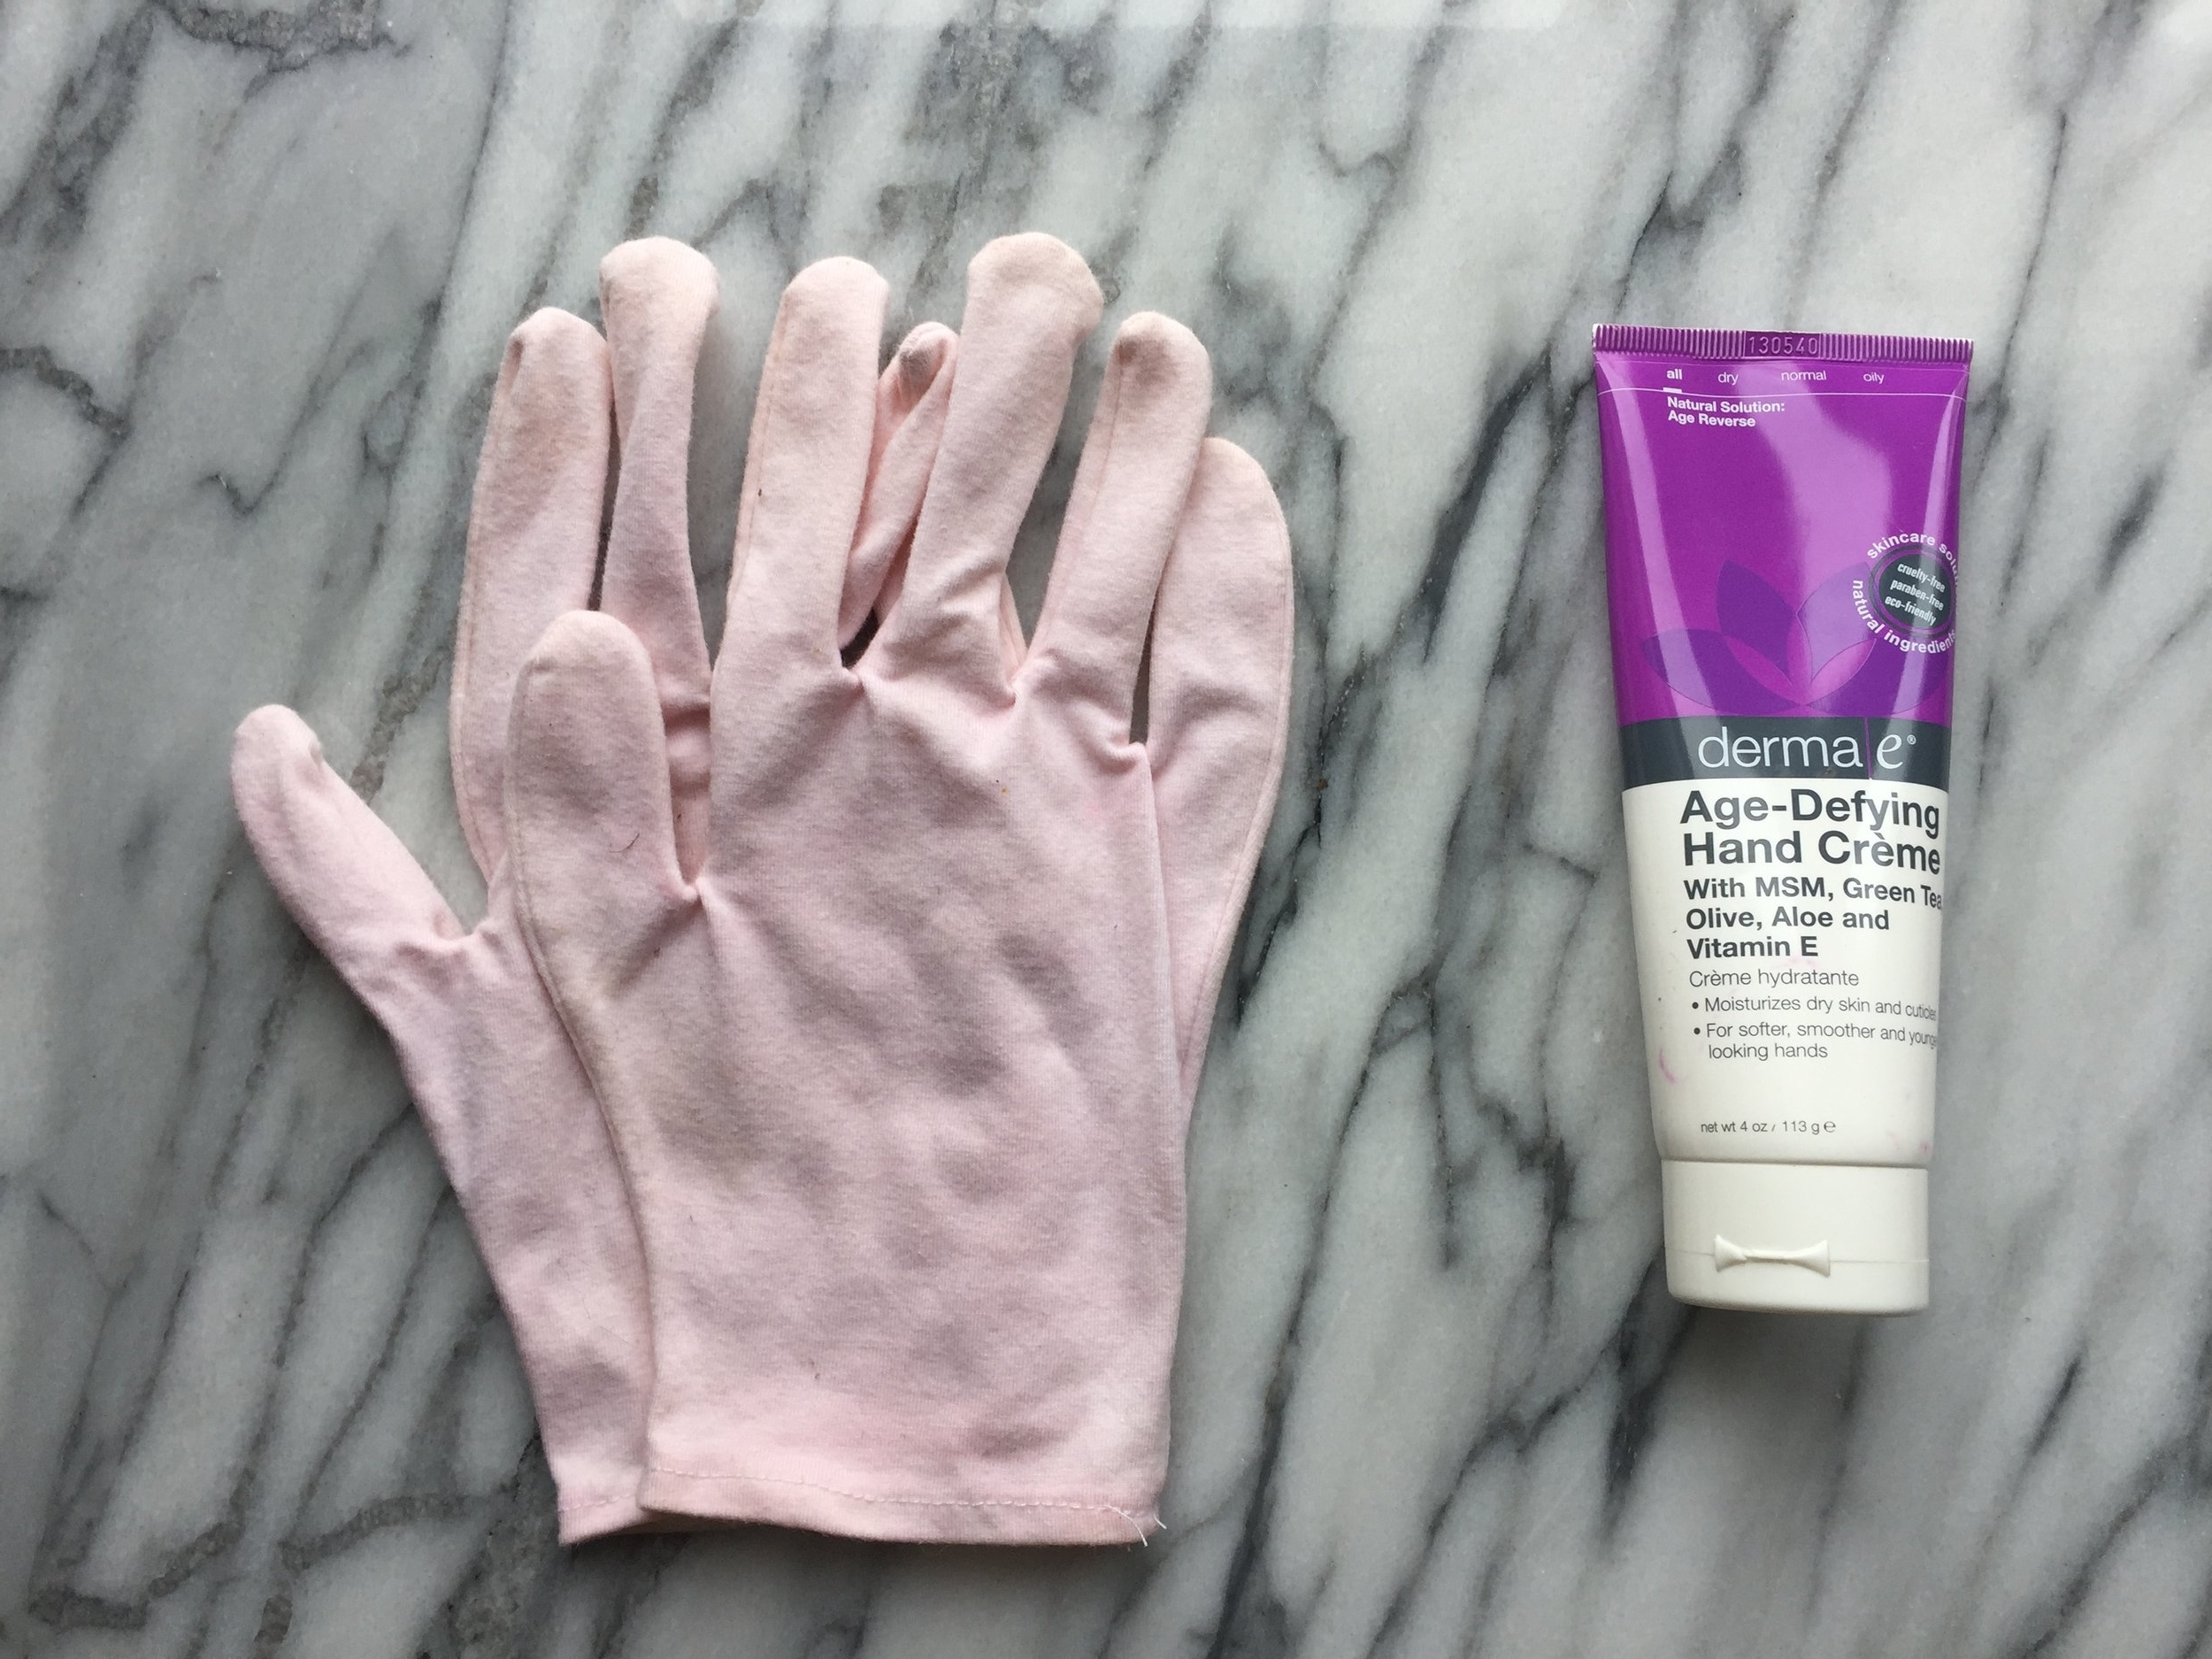 Caring for your hands: Sleeping Gloves and hand cream